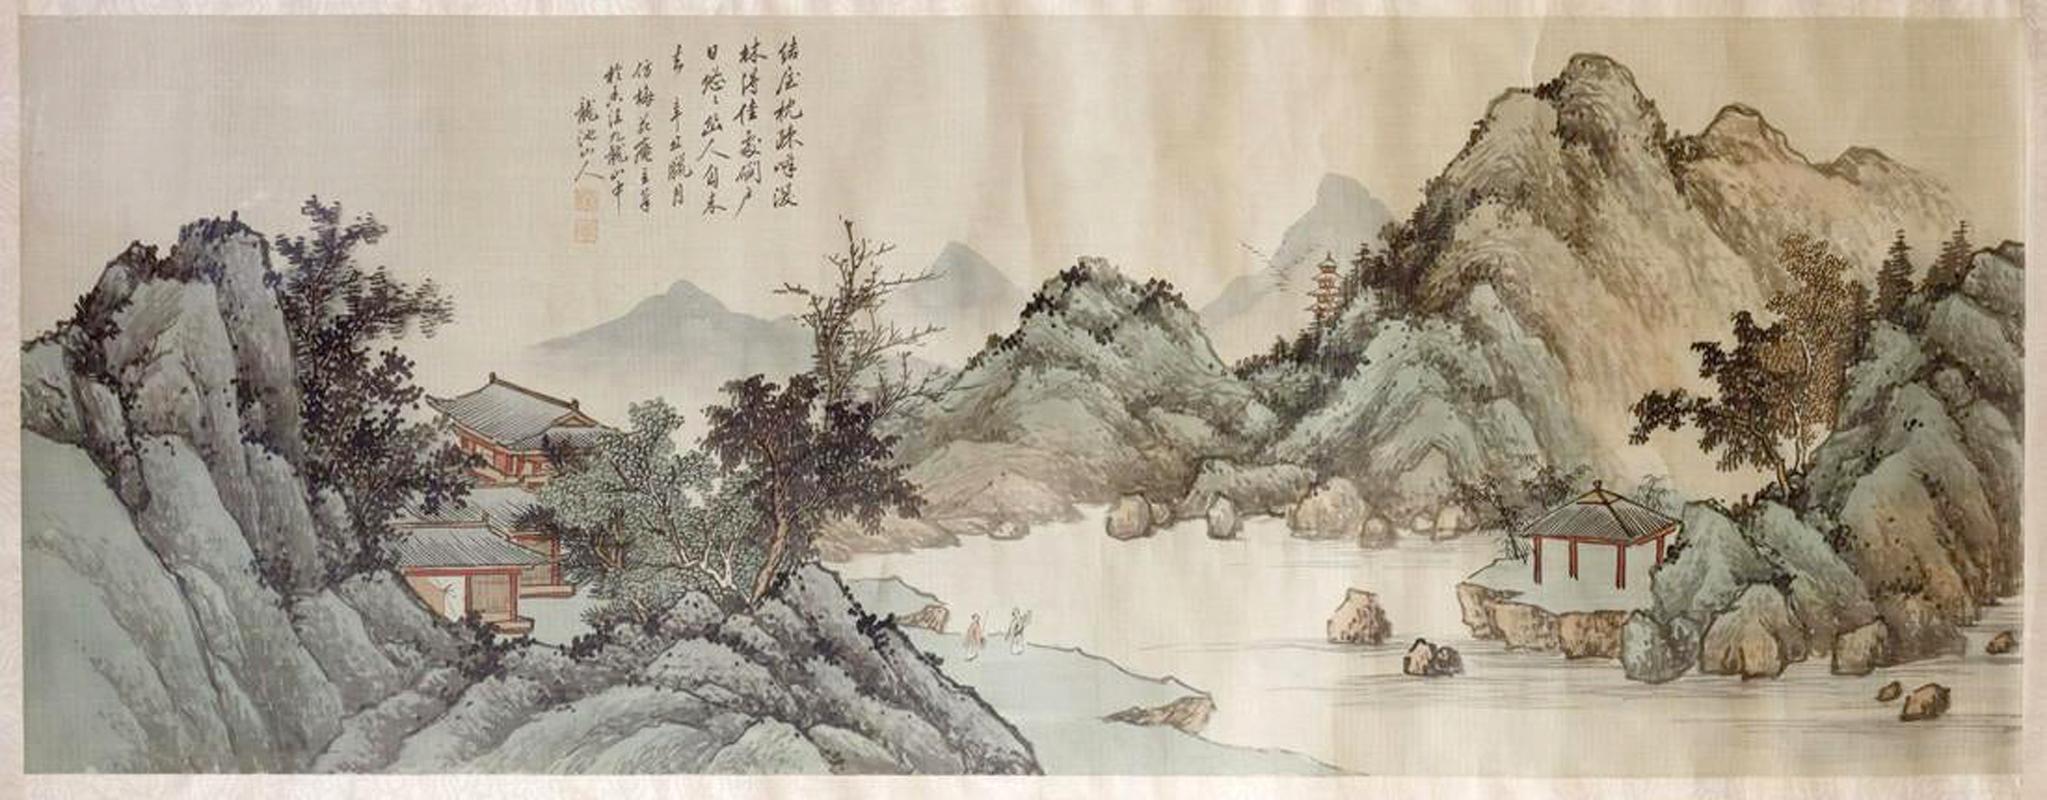 A Chinese horizontal landscape scroll painting in ink and watercolor by the well-known late Qing imperial painter Zhou QiaoNian (1873-1932), who signed his work with his literary name 